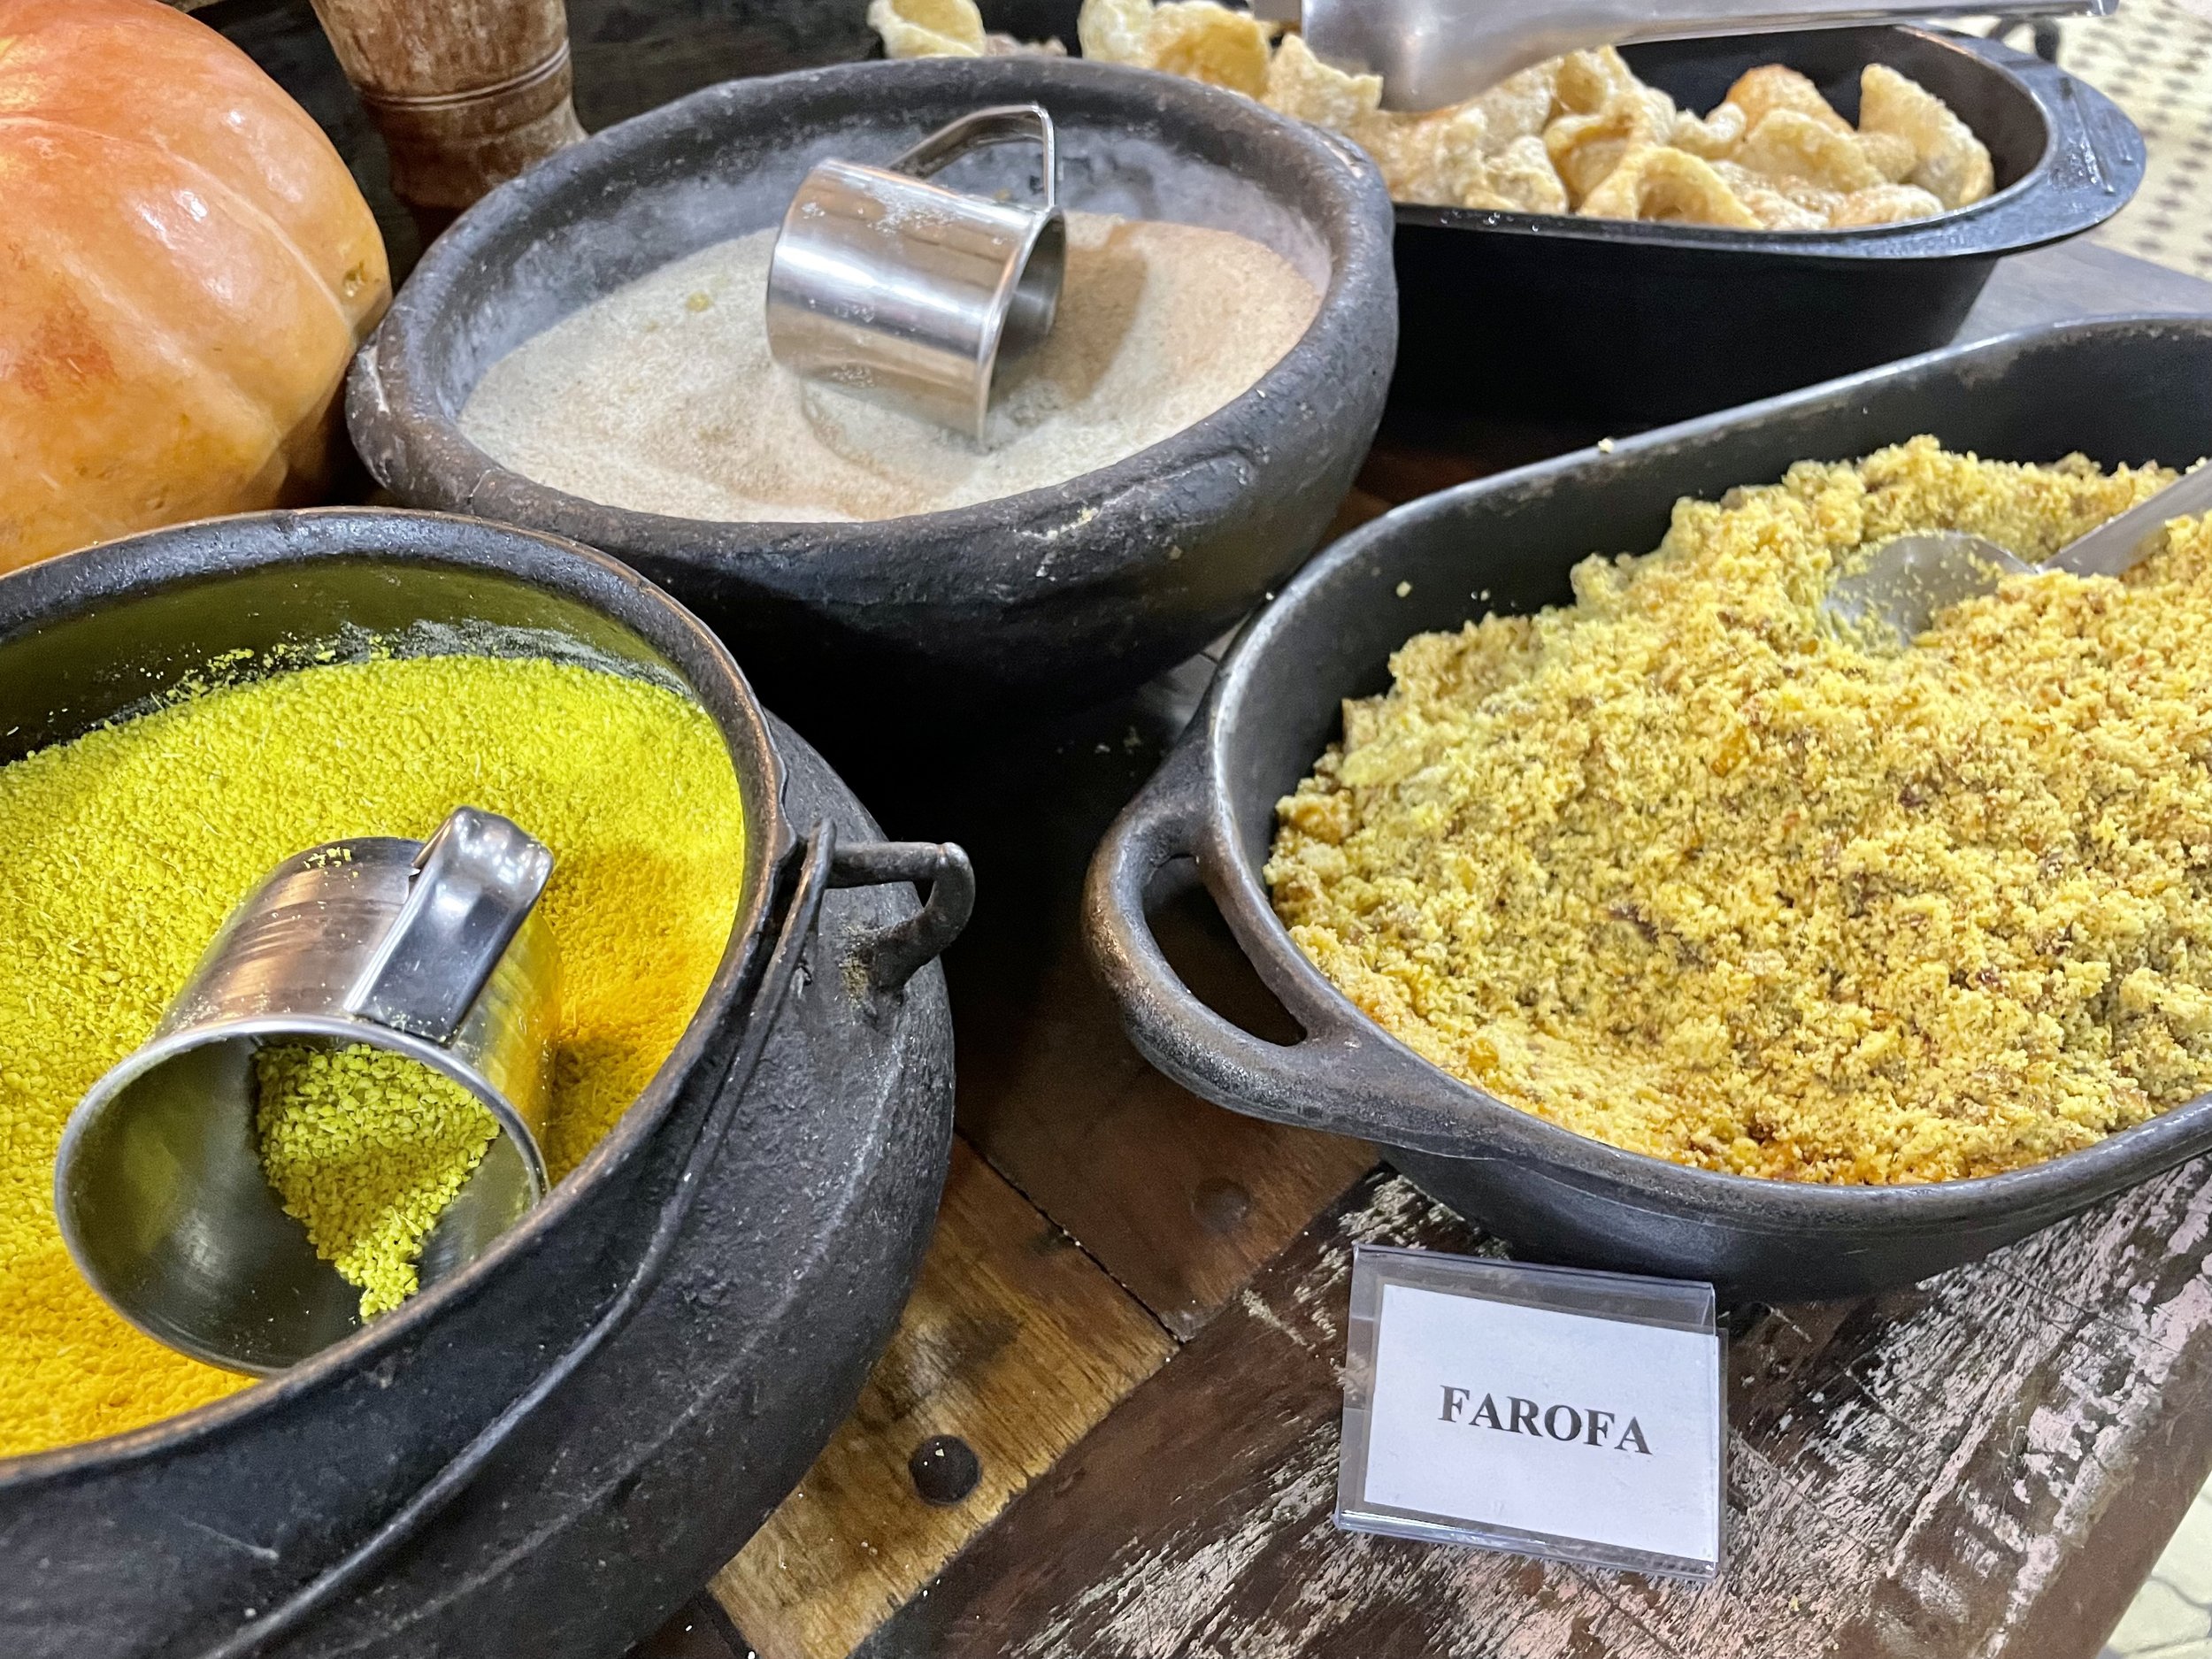 Farofa: Grated and roasted manioc with a variety of flavors.